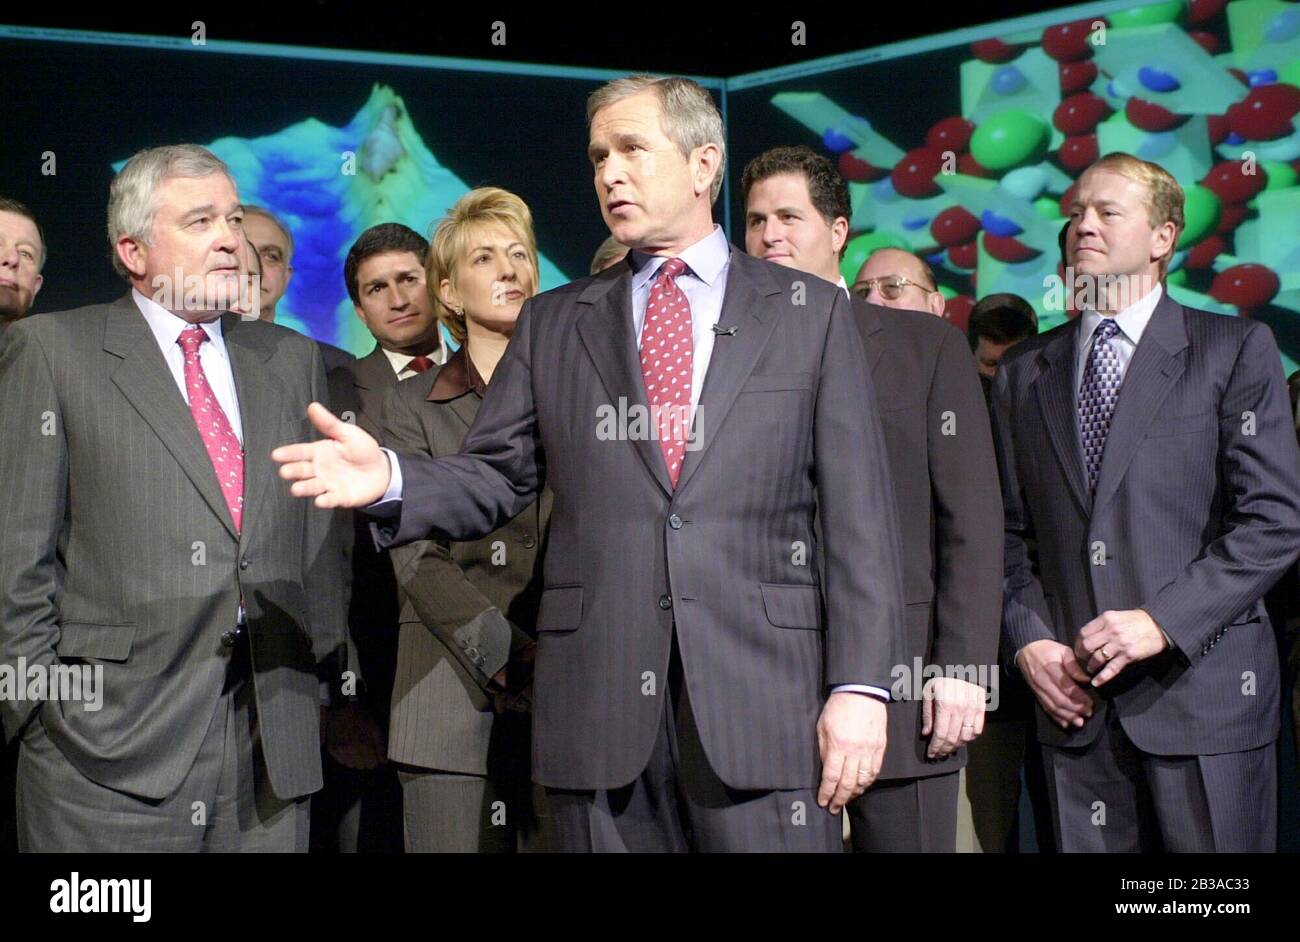 Austin, Texas USA, 04 JAN 2001: President-elect George W. Bush holds the second of two economic summits at a virtual reality demonstration lab at the University of Texas at Austin with CEO's from U.S. corporations.   The business leaders spoke of how education initiatives can help the faltering U.S. economy. Left to right, Lou Gerstner (IBM), Steve Papermaster (Agillion), Carly Fiorina (Hewlett Packard),  Michael Dell (Dell Computer),  and John Chambers (Cisco Systems). ©Bob Daemmrich Stock Photo